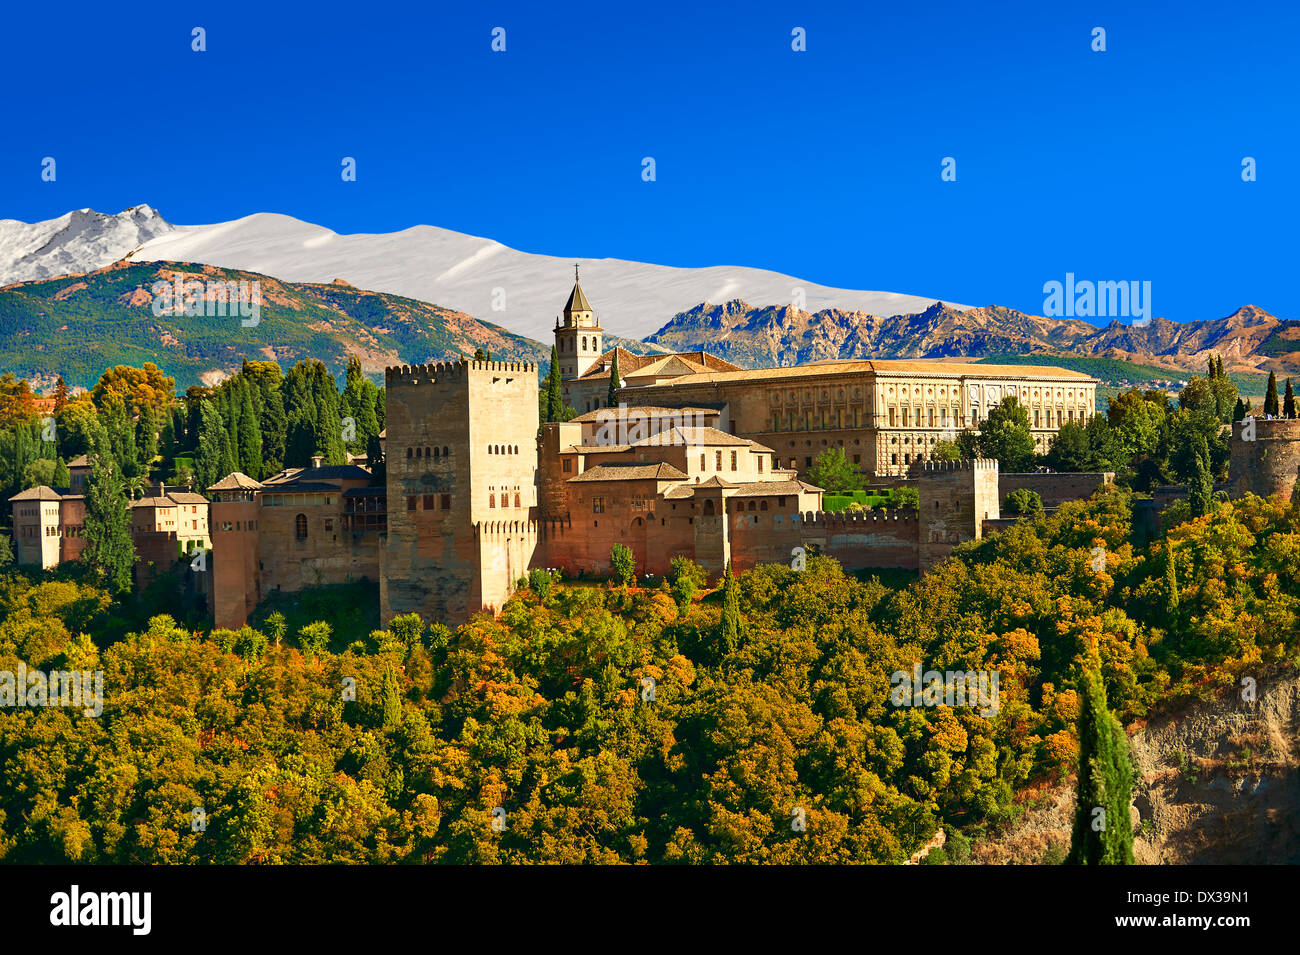 View of the Moorish Islamic Alhambra Palace complex and fortifications. Granada, Andalusia, Spain. Stock Photo